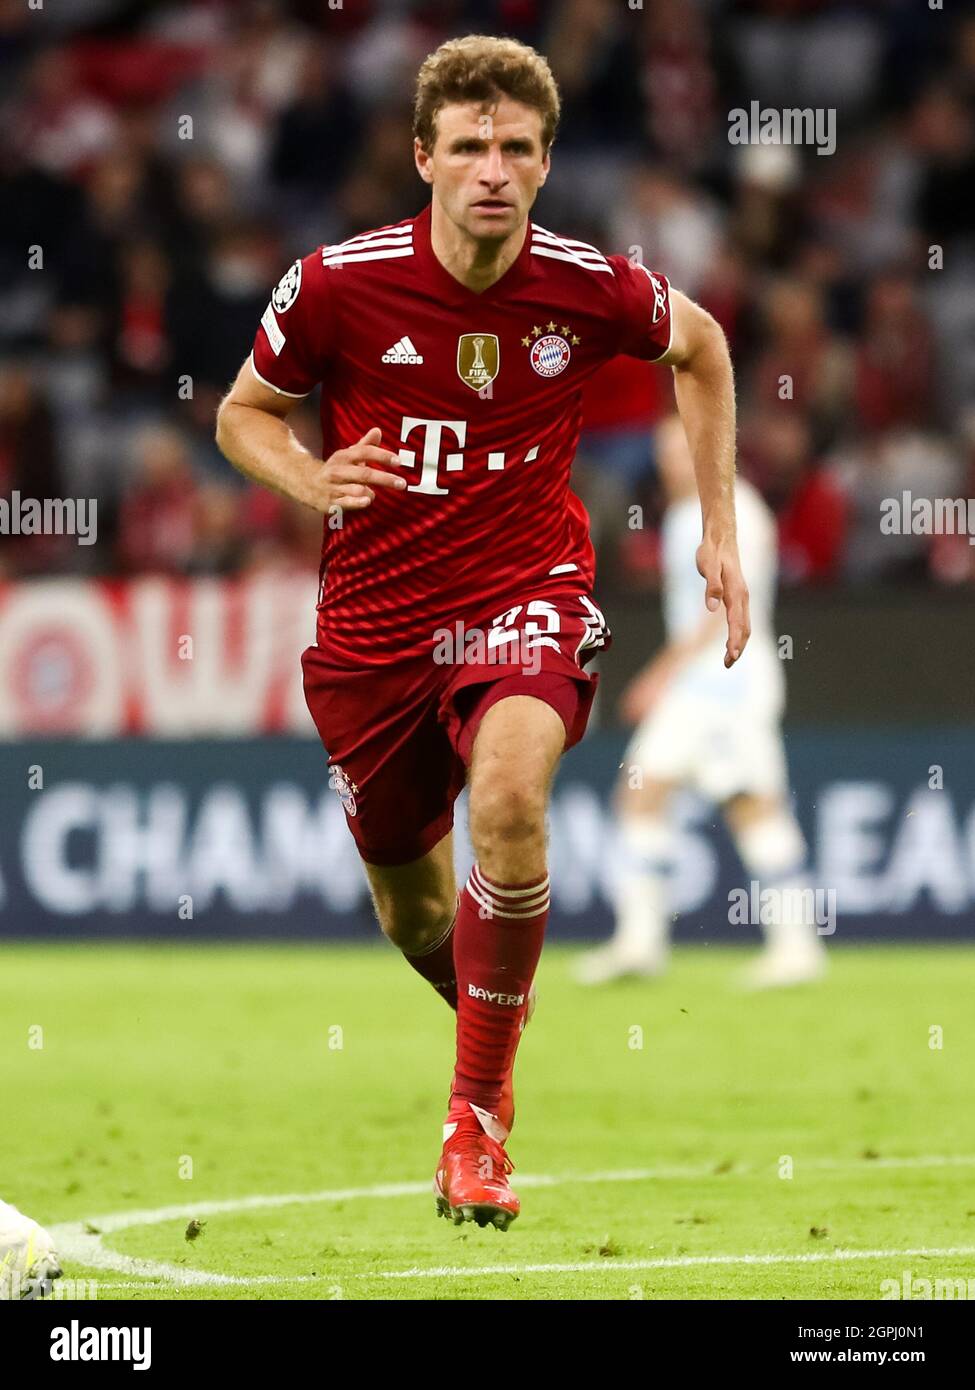 Mountaineer skylle at se MUNICH, GERMANY - SEPTEMBER 29: Thomas Muller of FC Bayern Munchen during  the UEFA Champions League Group Stage match between Bayern Munchen and  Dinamo Kiev at the Allianz Arena on September 29,